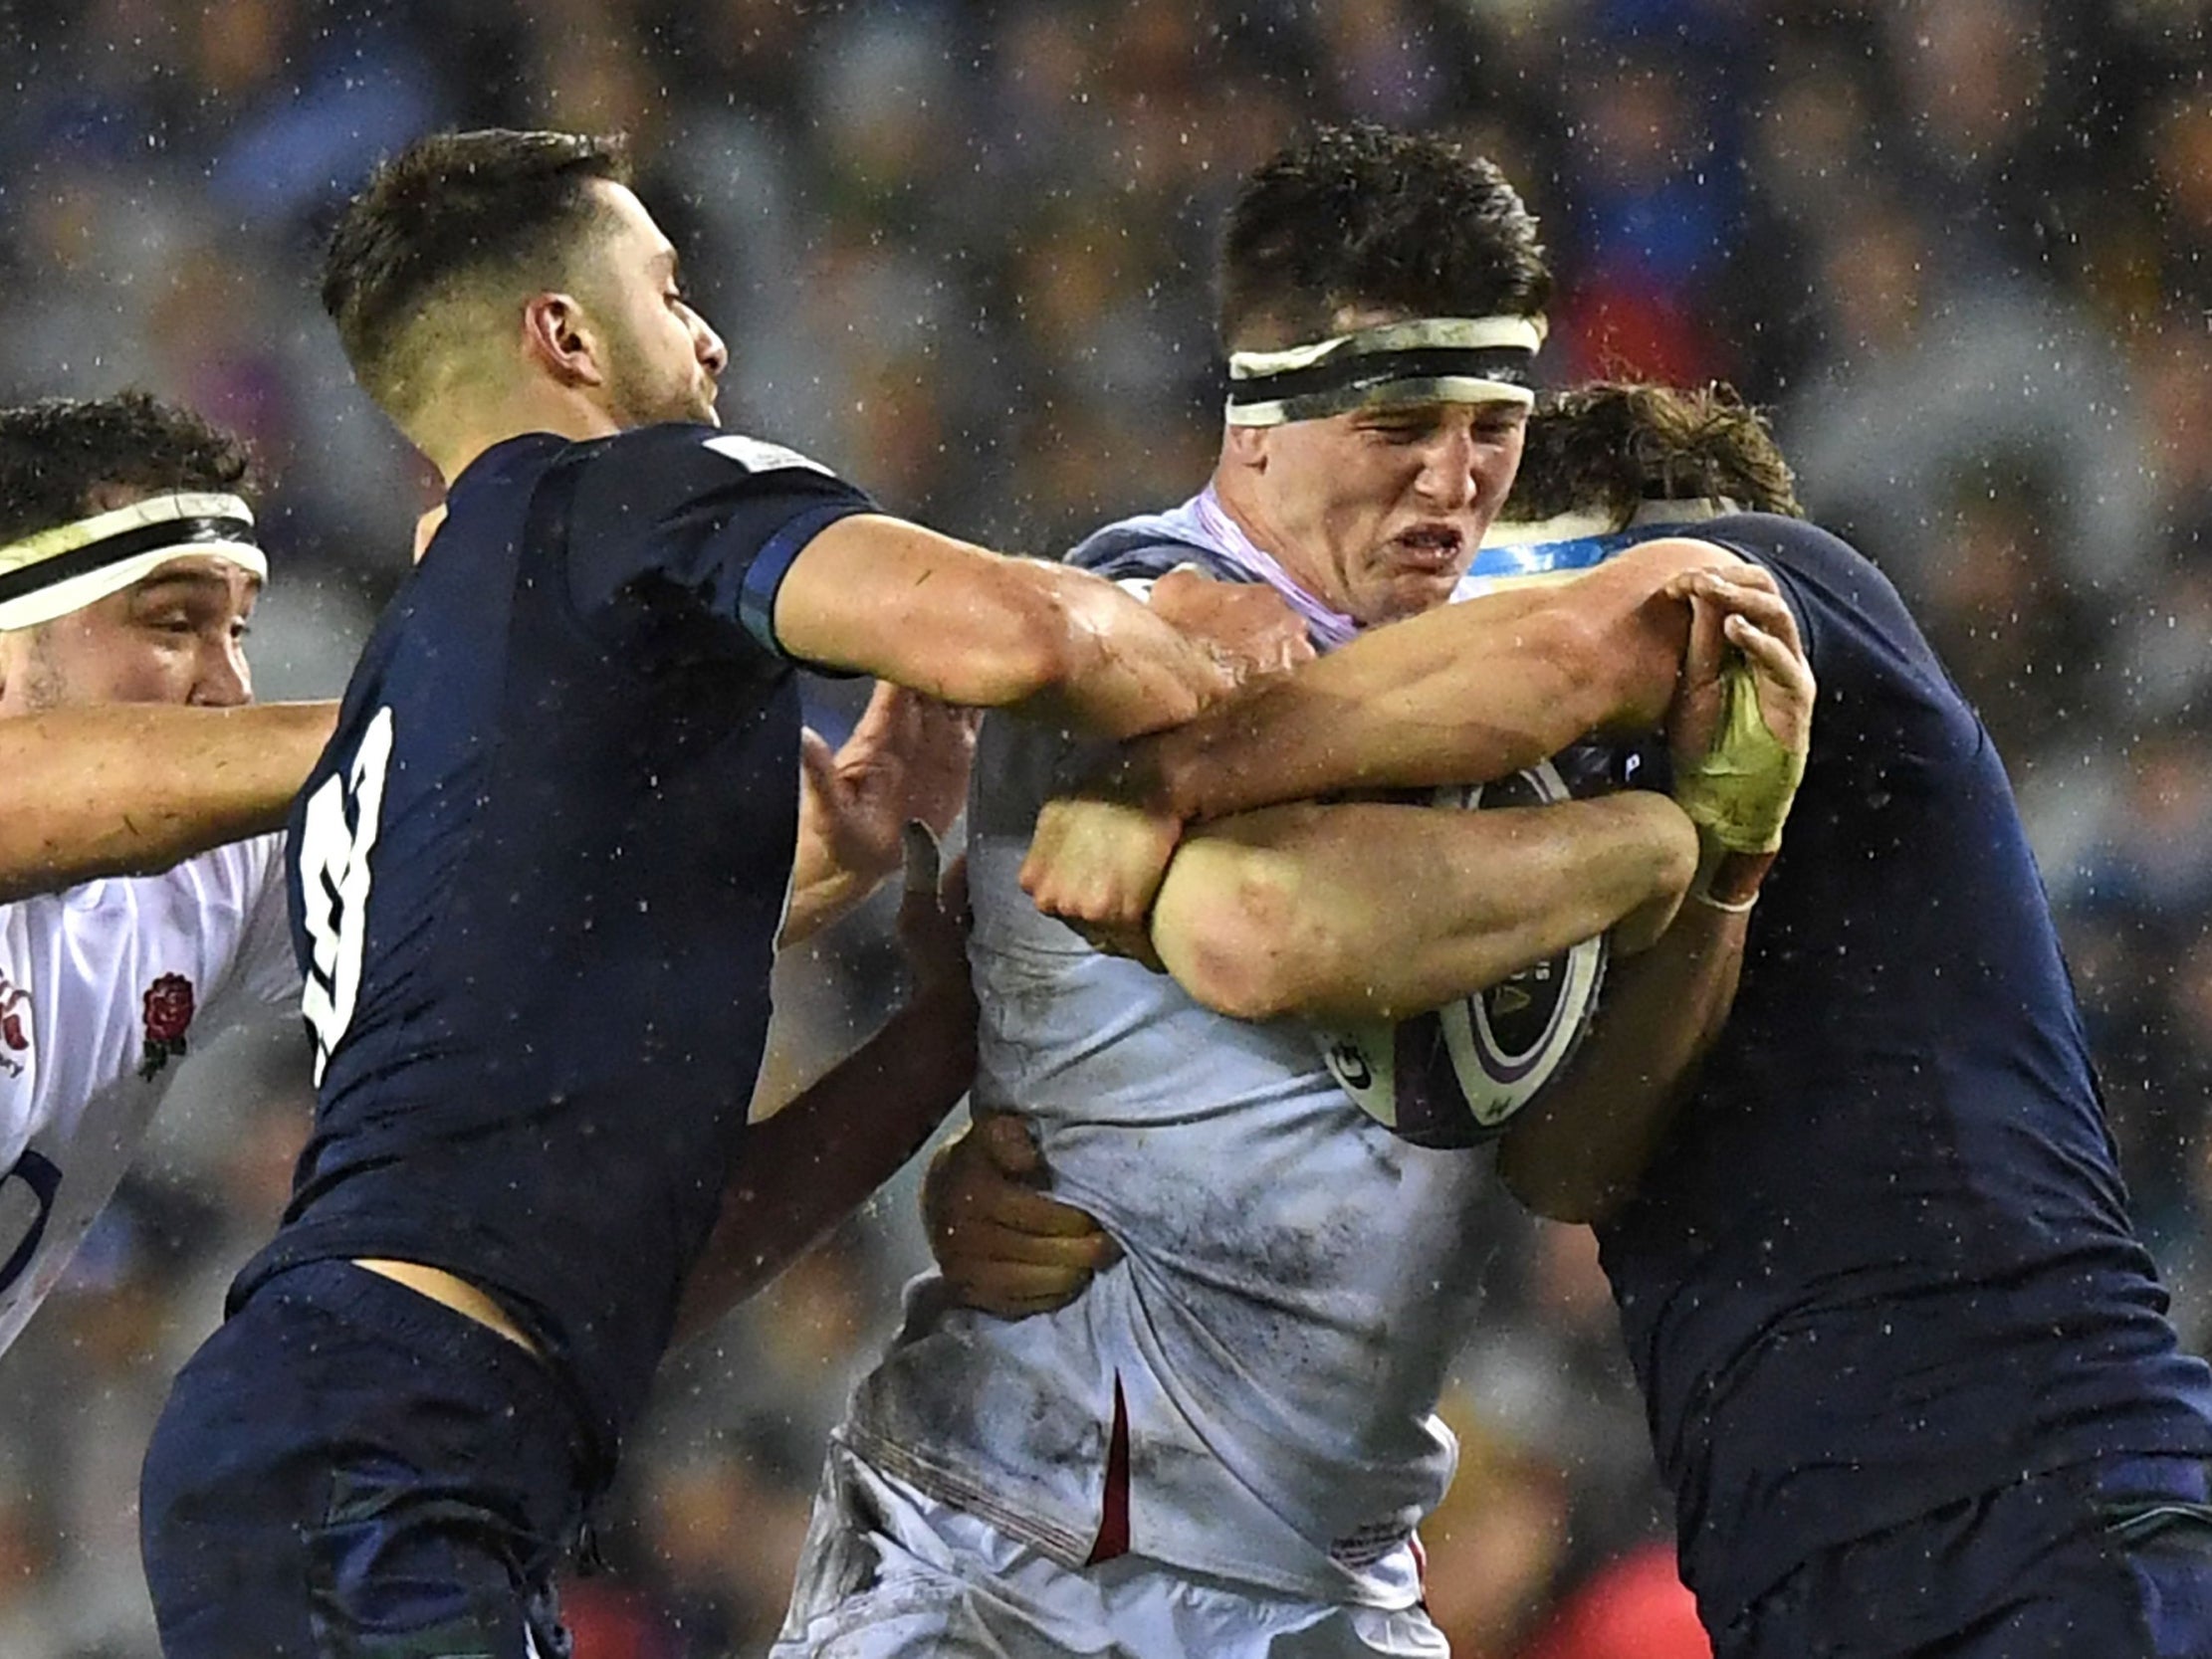 Scotland vs England player ratings: Tom Curry stars at No 8 to help secure Calcutta Cup at Murrayfield